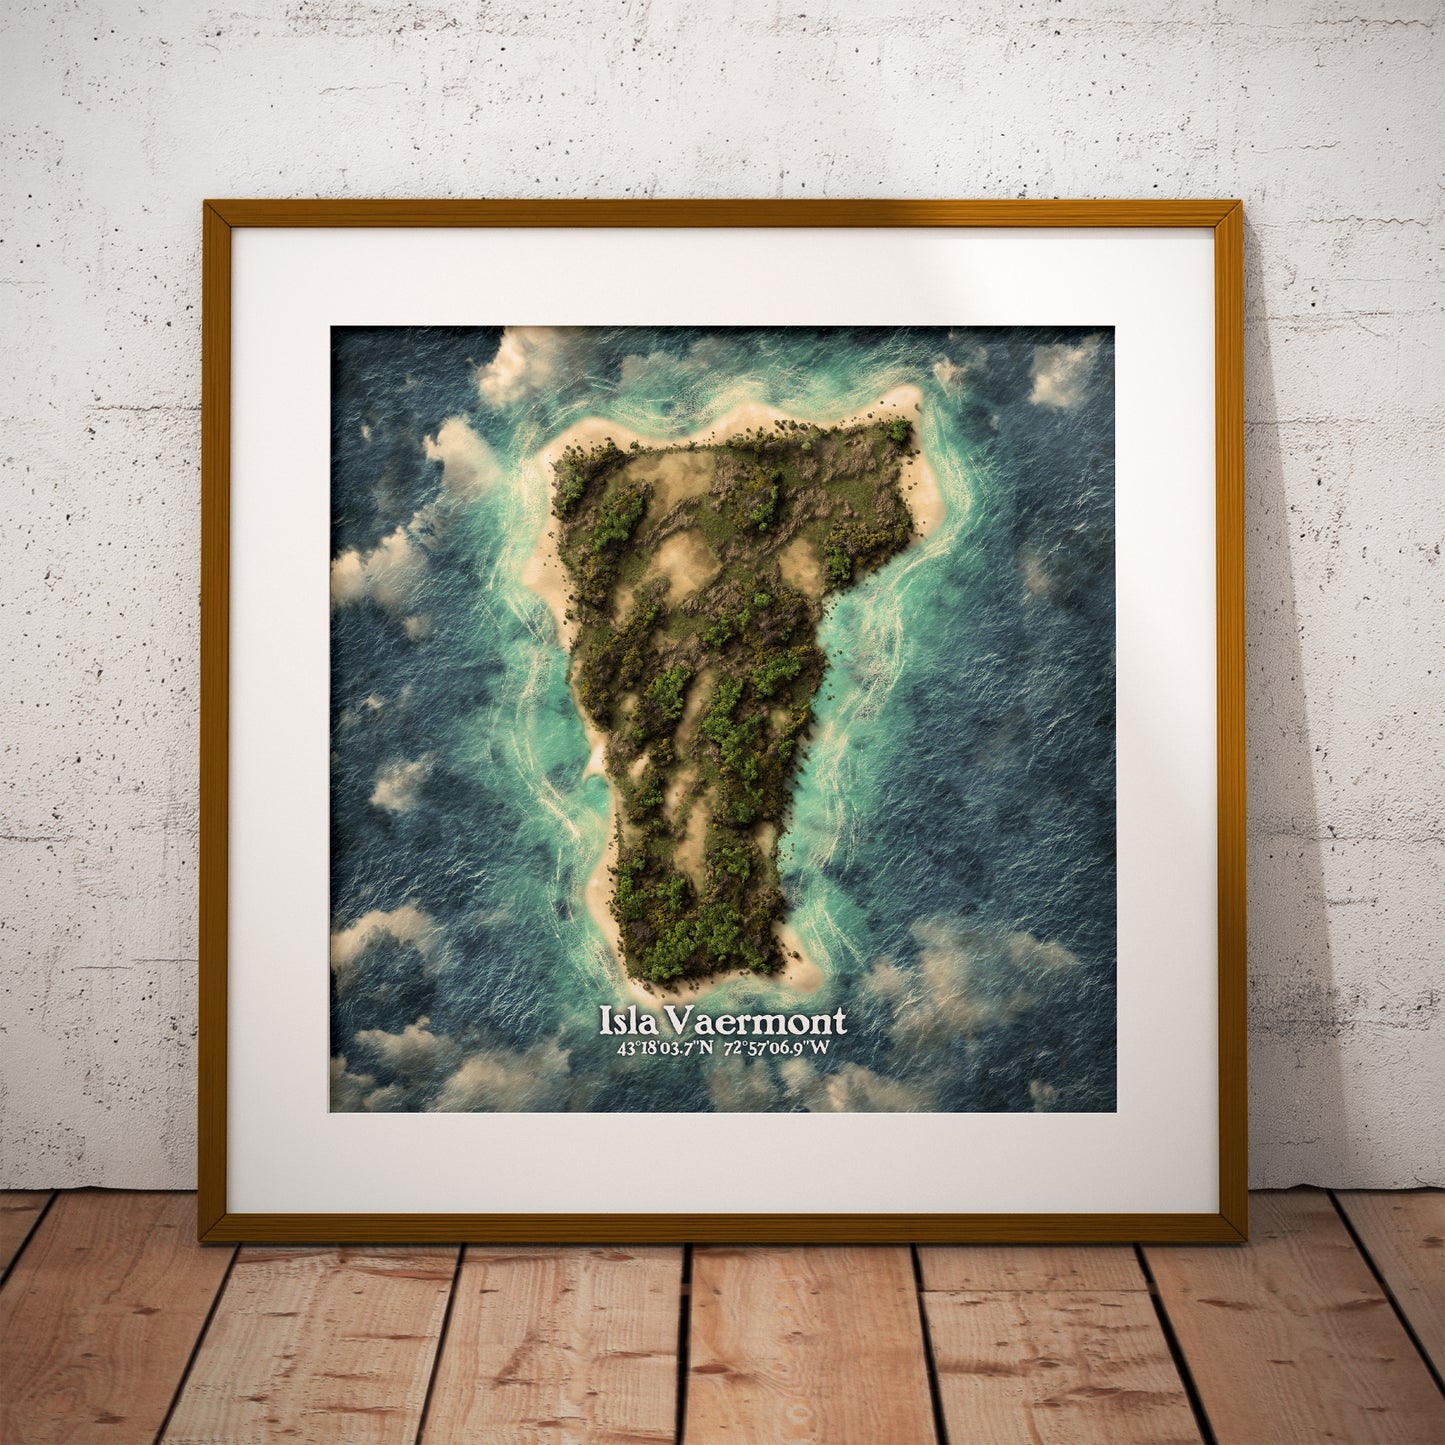 Vermont state as an island print (Isla Vaermont). Novelty art - Imagine your state as an island.